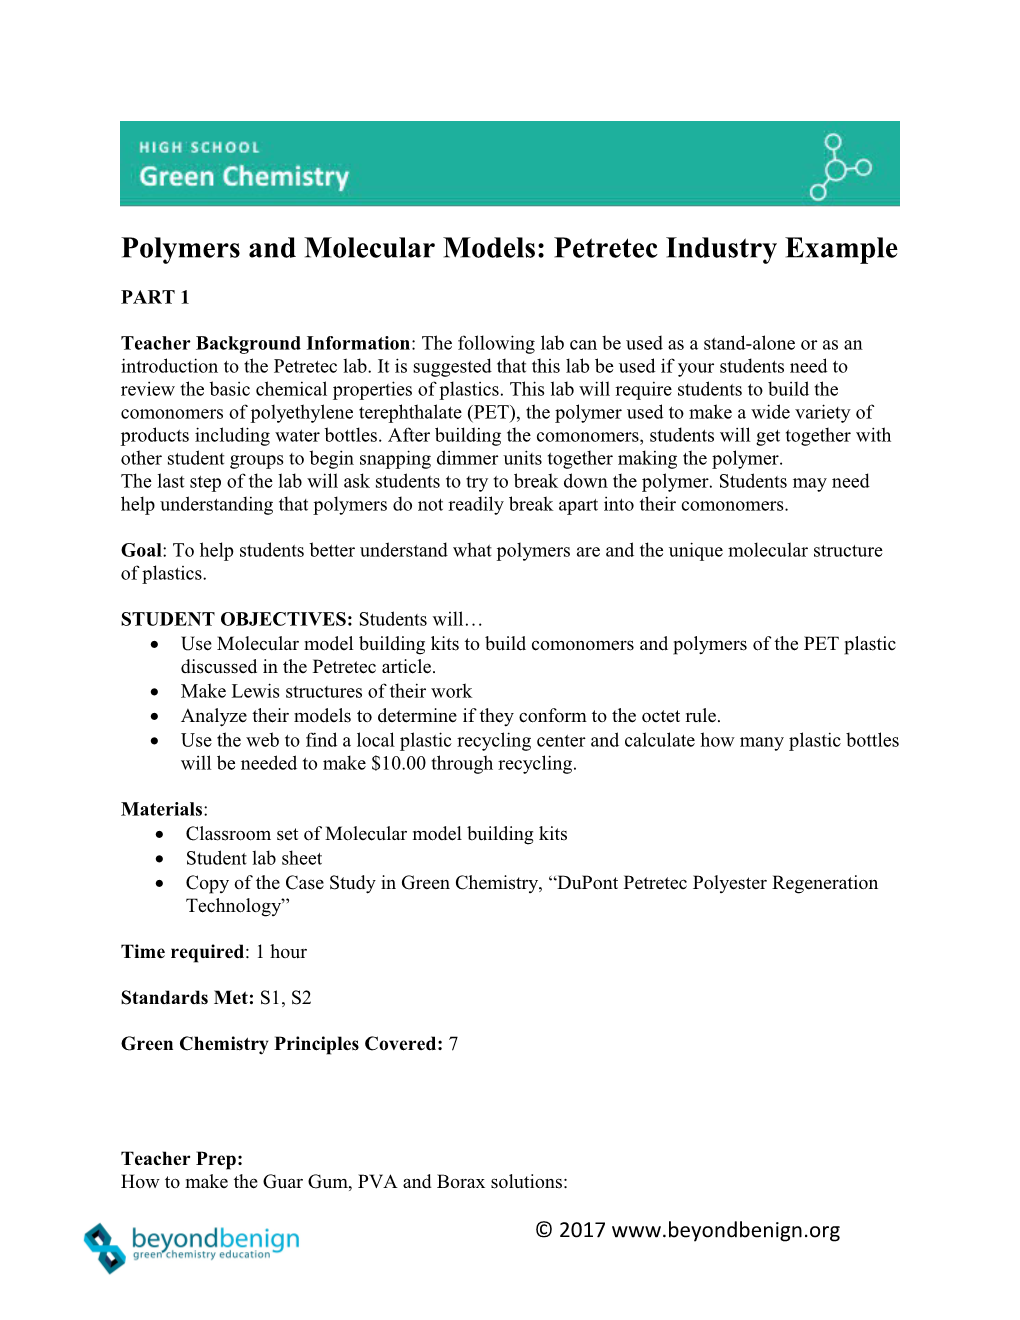 Polymers and Molecular Models: Petretec Industry Example